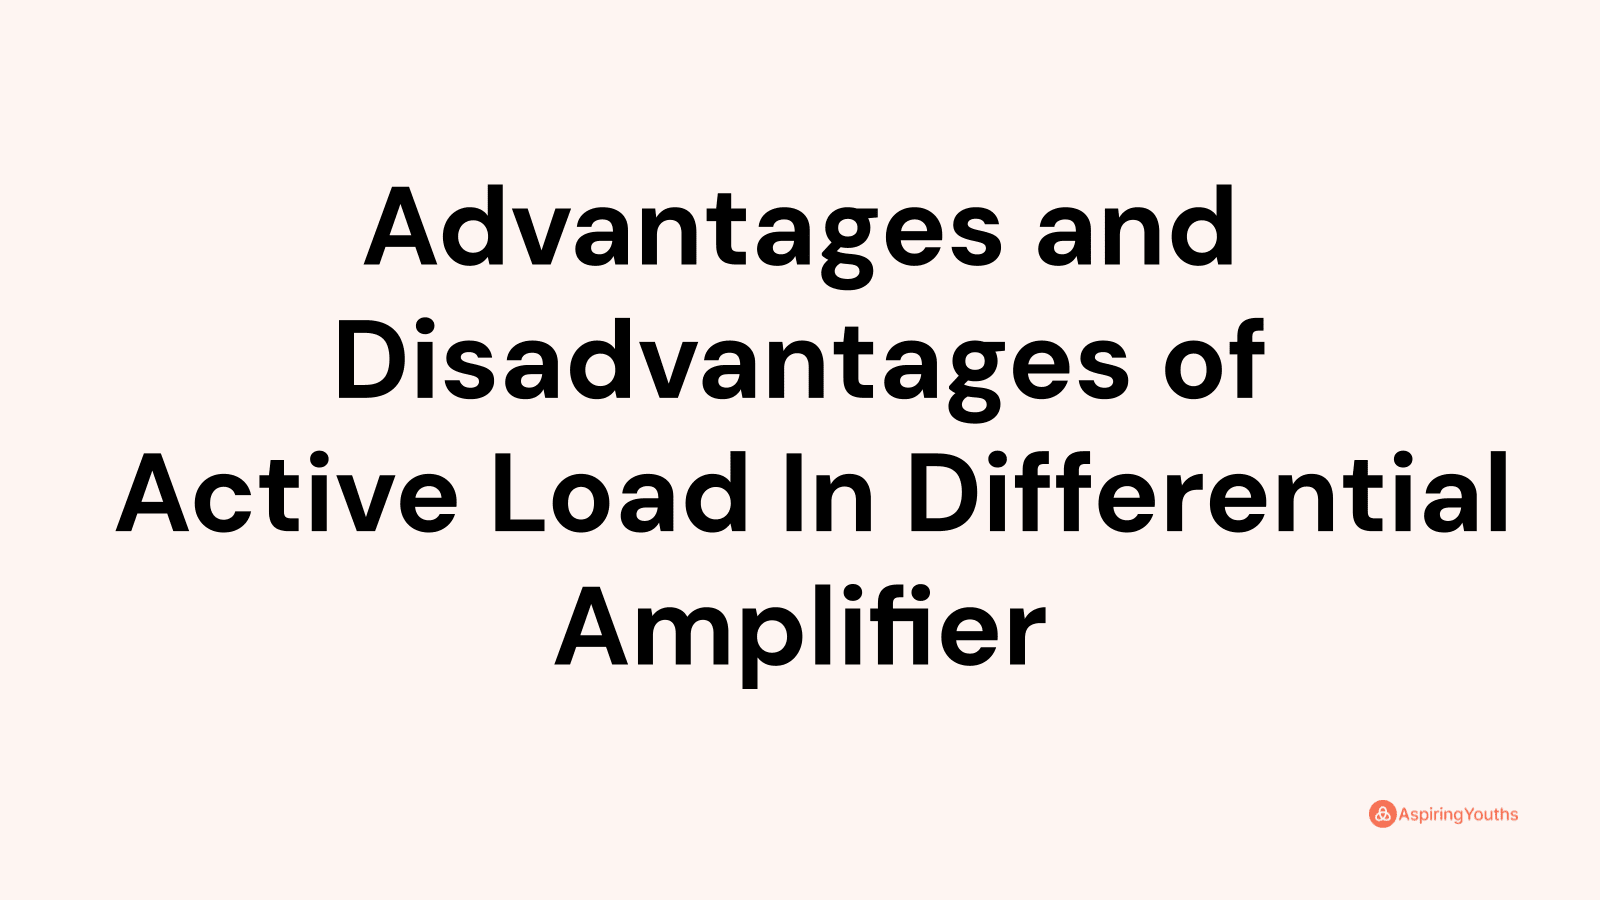 Advantages and disadvantages of Active Load In Differential Amplifier